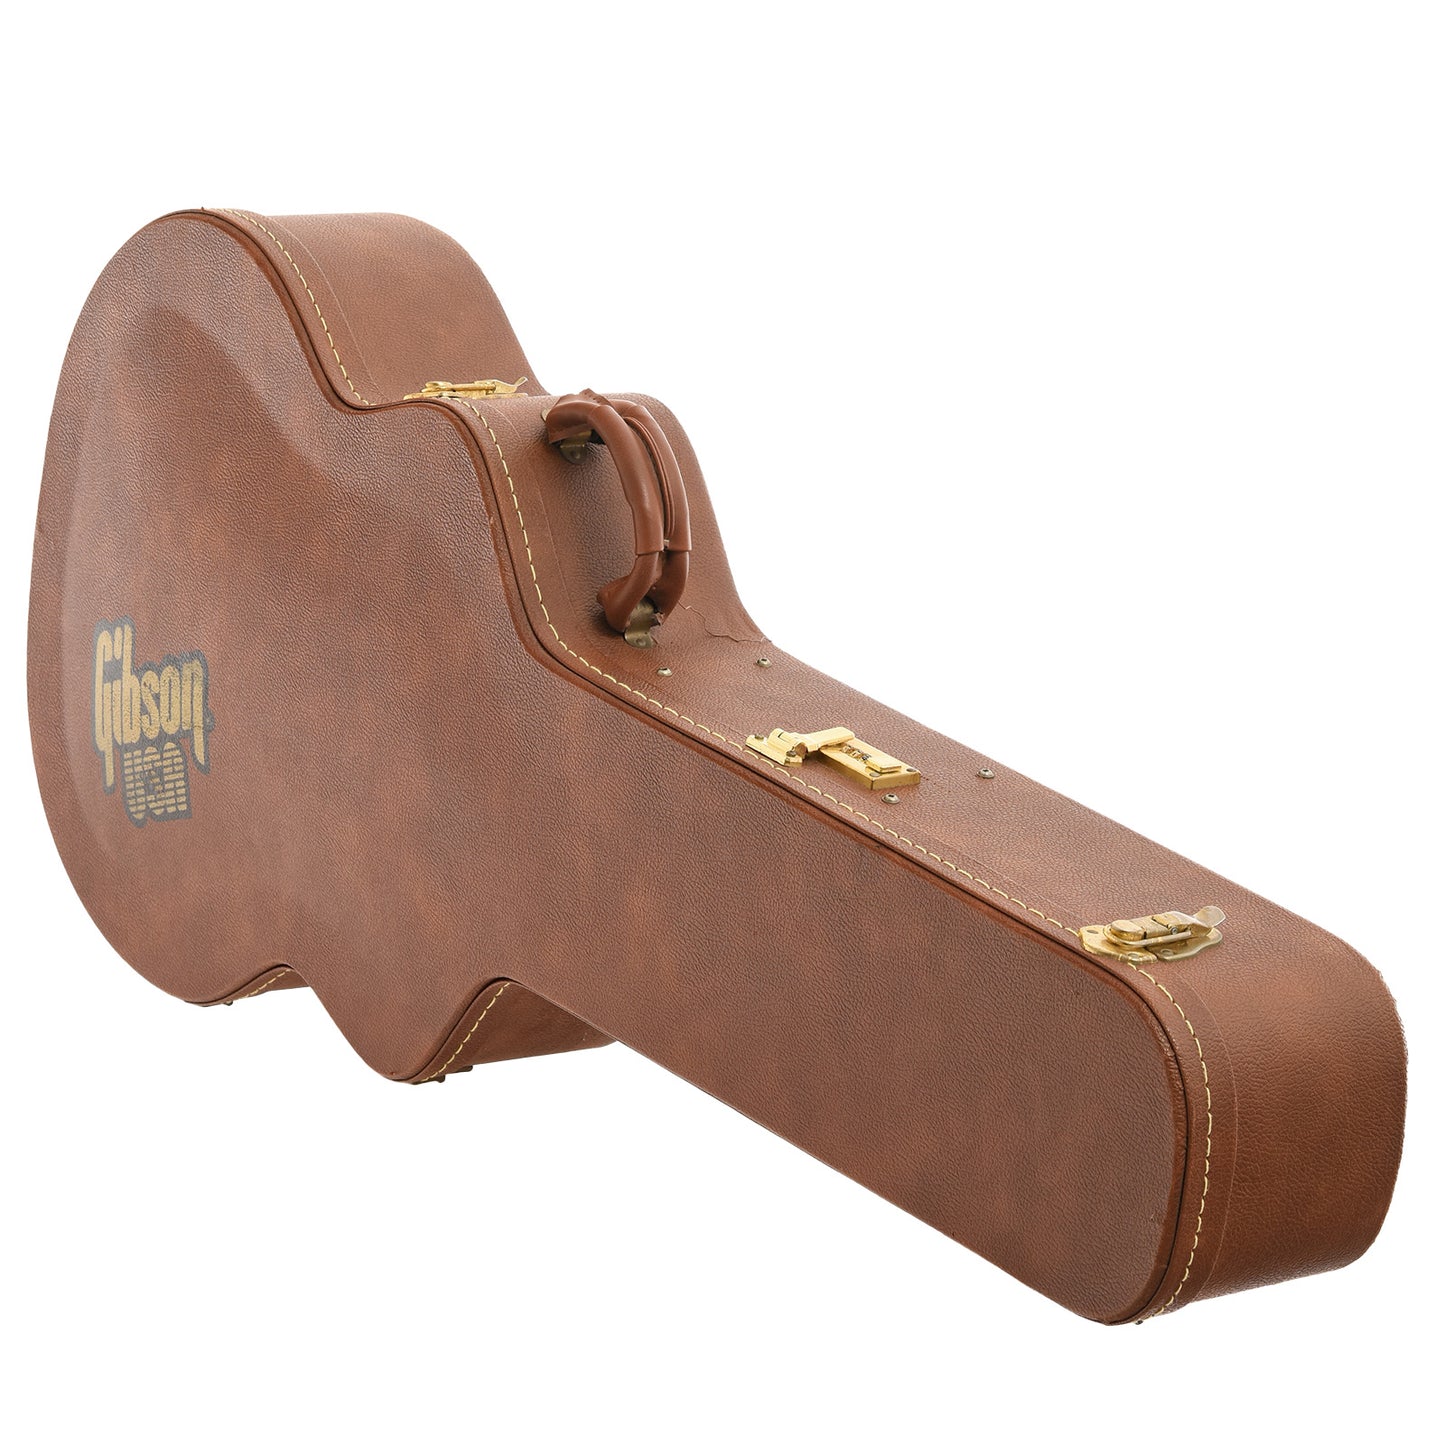 Case for Gibson Super 400 CES Hollow Body